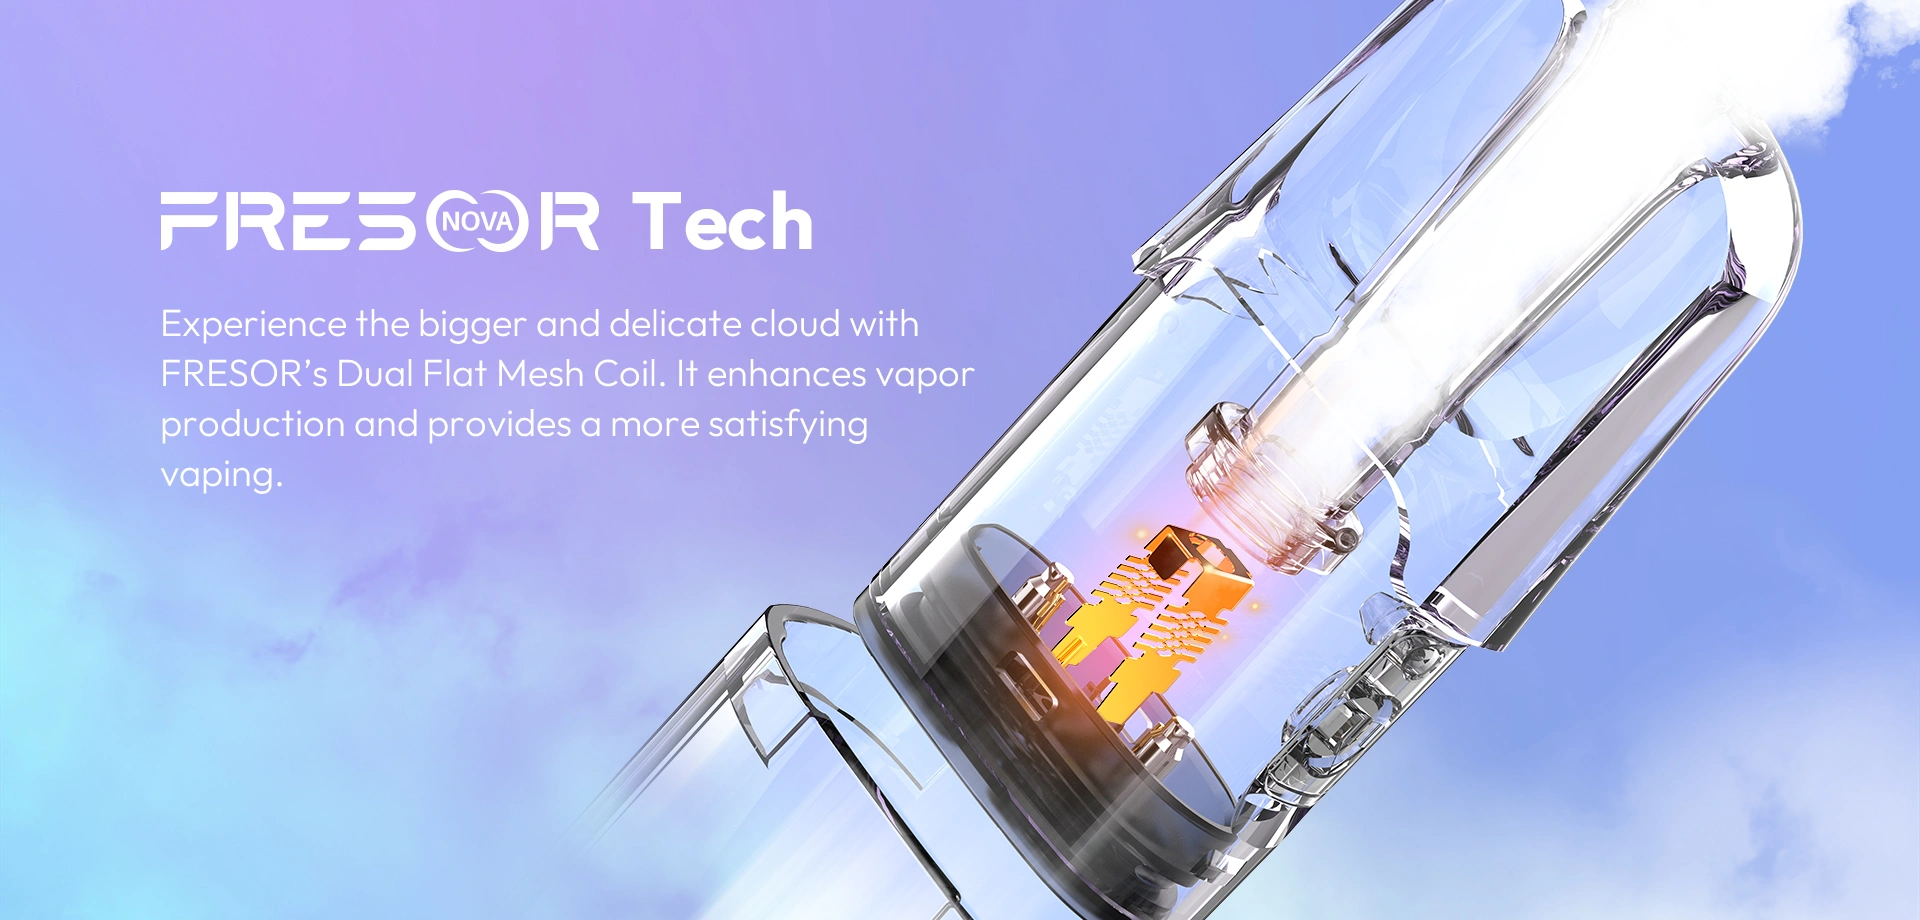 FRESOR NOVA Tech Experience the bigger and delicate cloud with FRESOR's Dual Flat Mesh Coil. lt enhances vapor production and provides a more satisfying vaping.